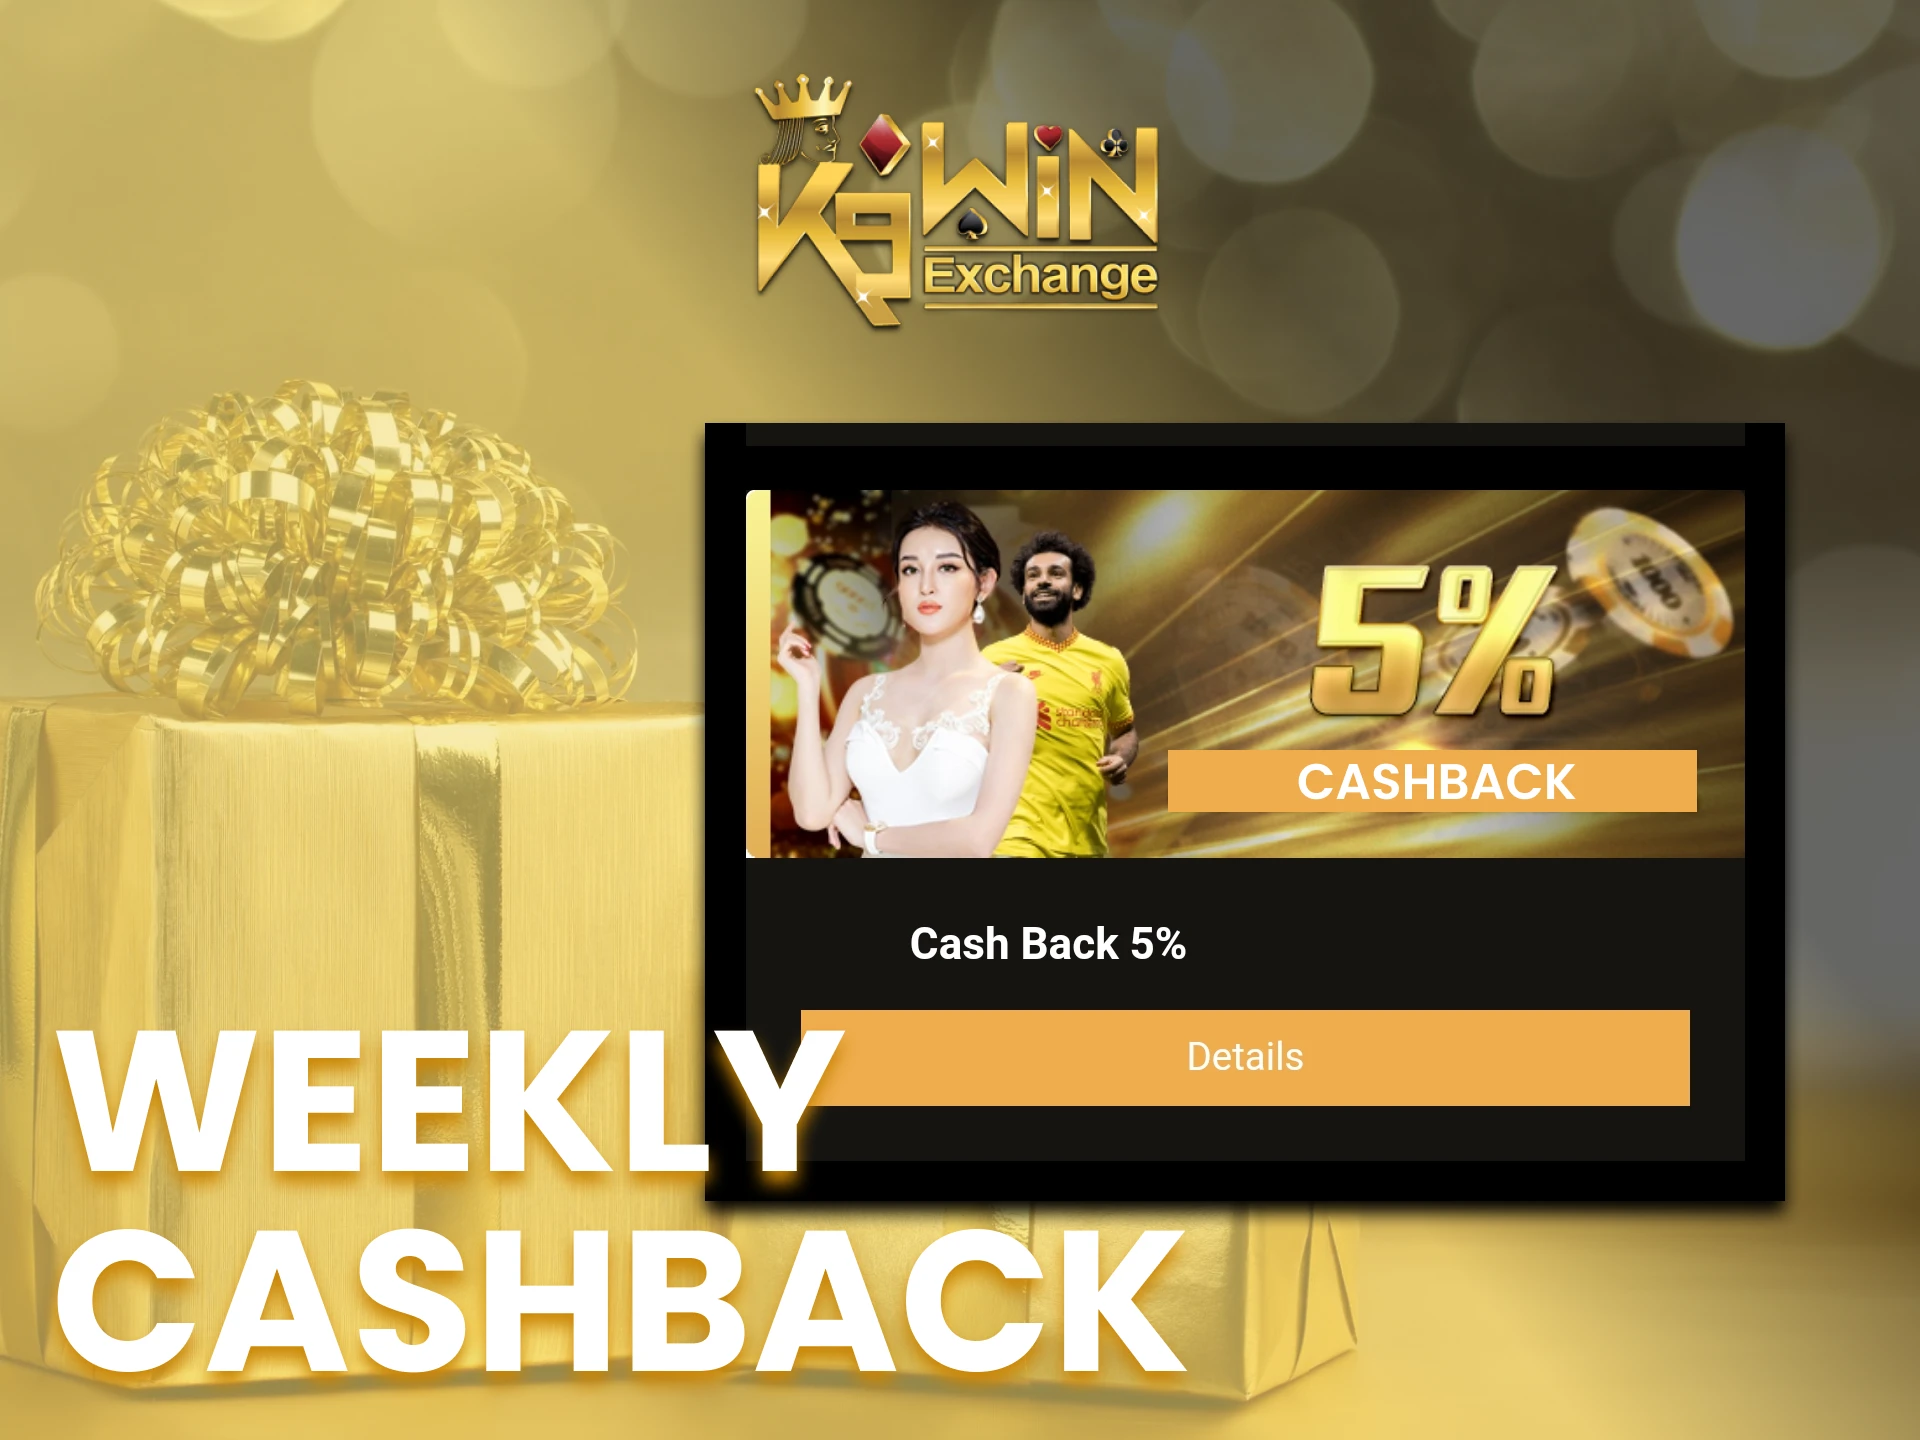 Get your money back with the K9Win weekly cashback.